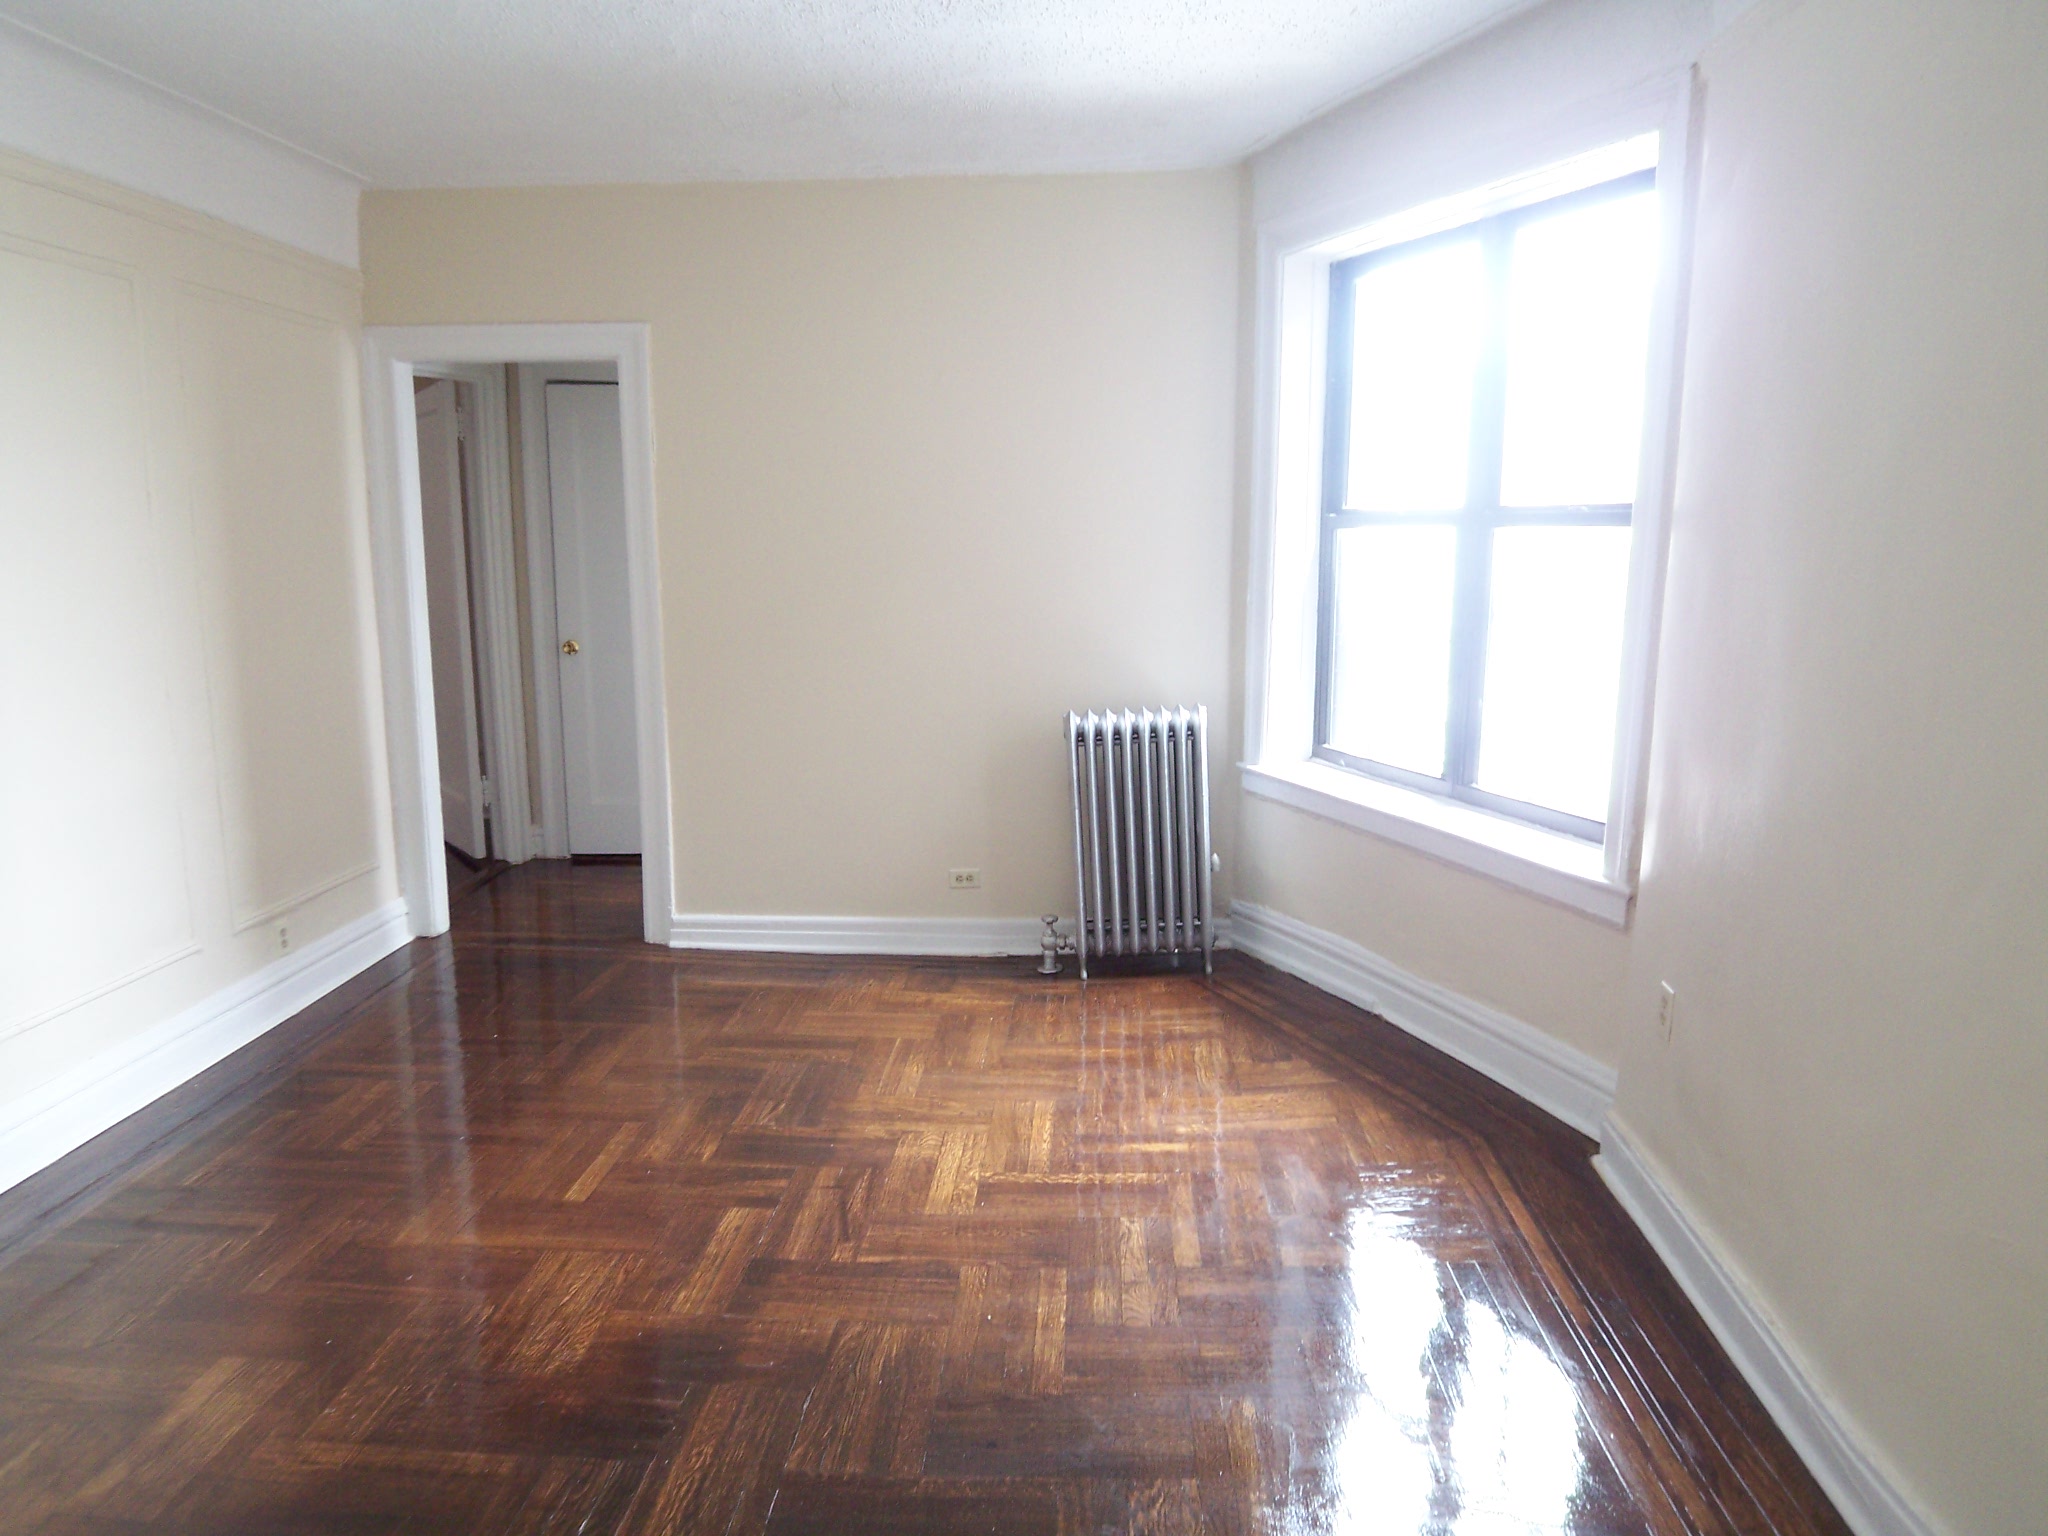 Bedroom Apartment For Rent In The Bronx | US Rental